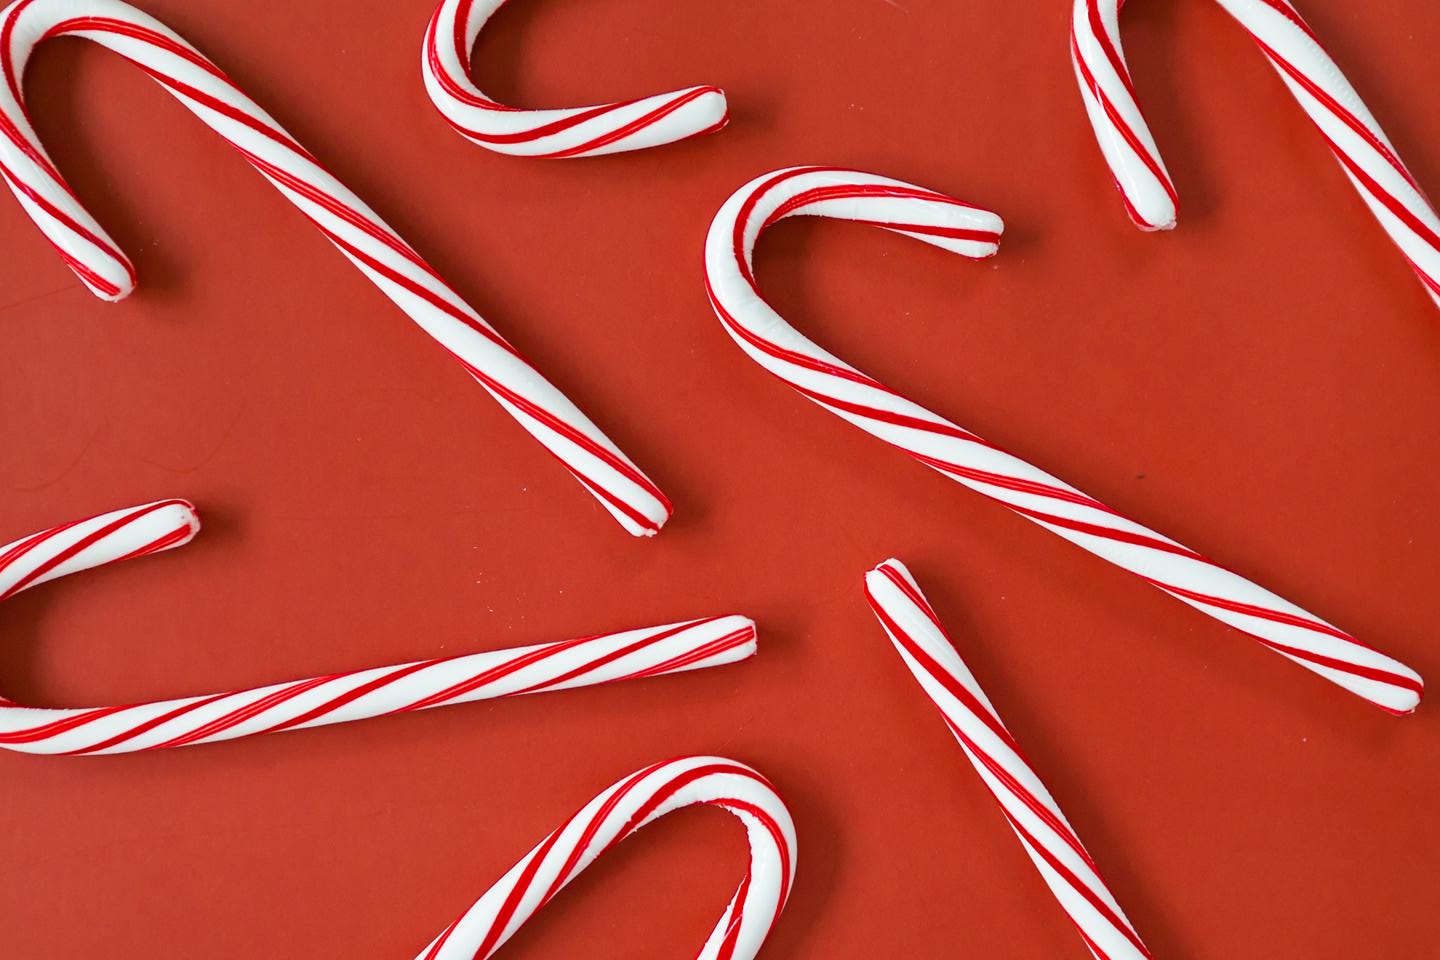 What C Drink Are You? Candy canes